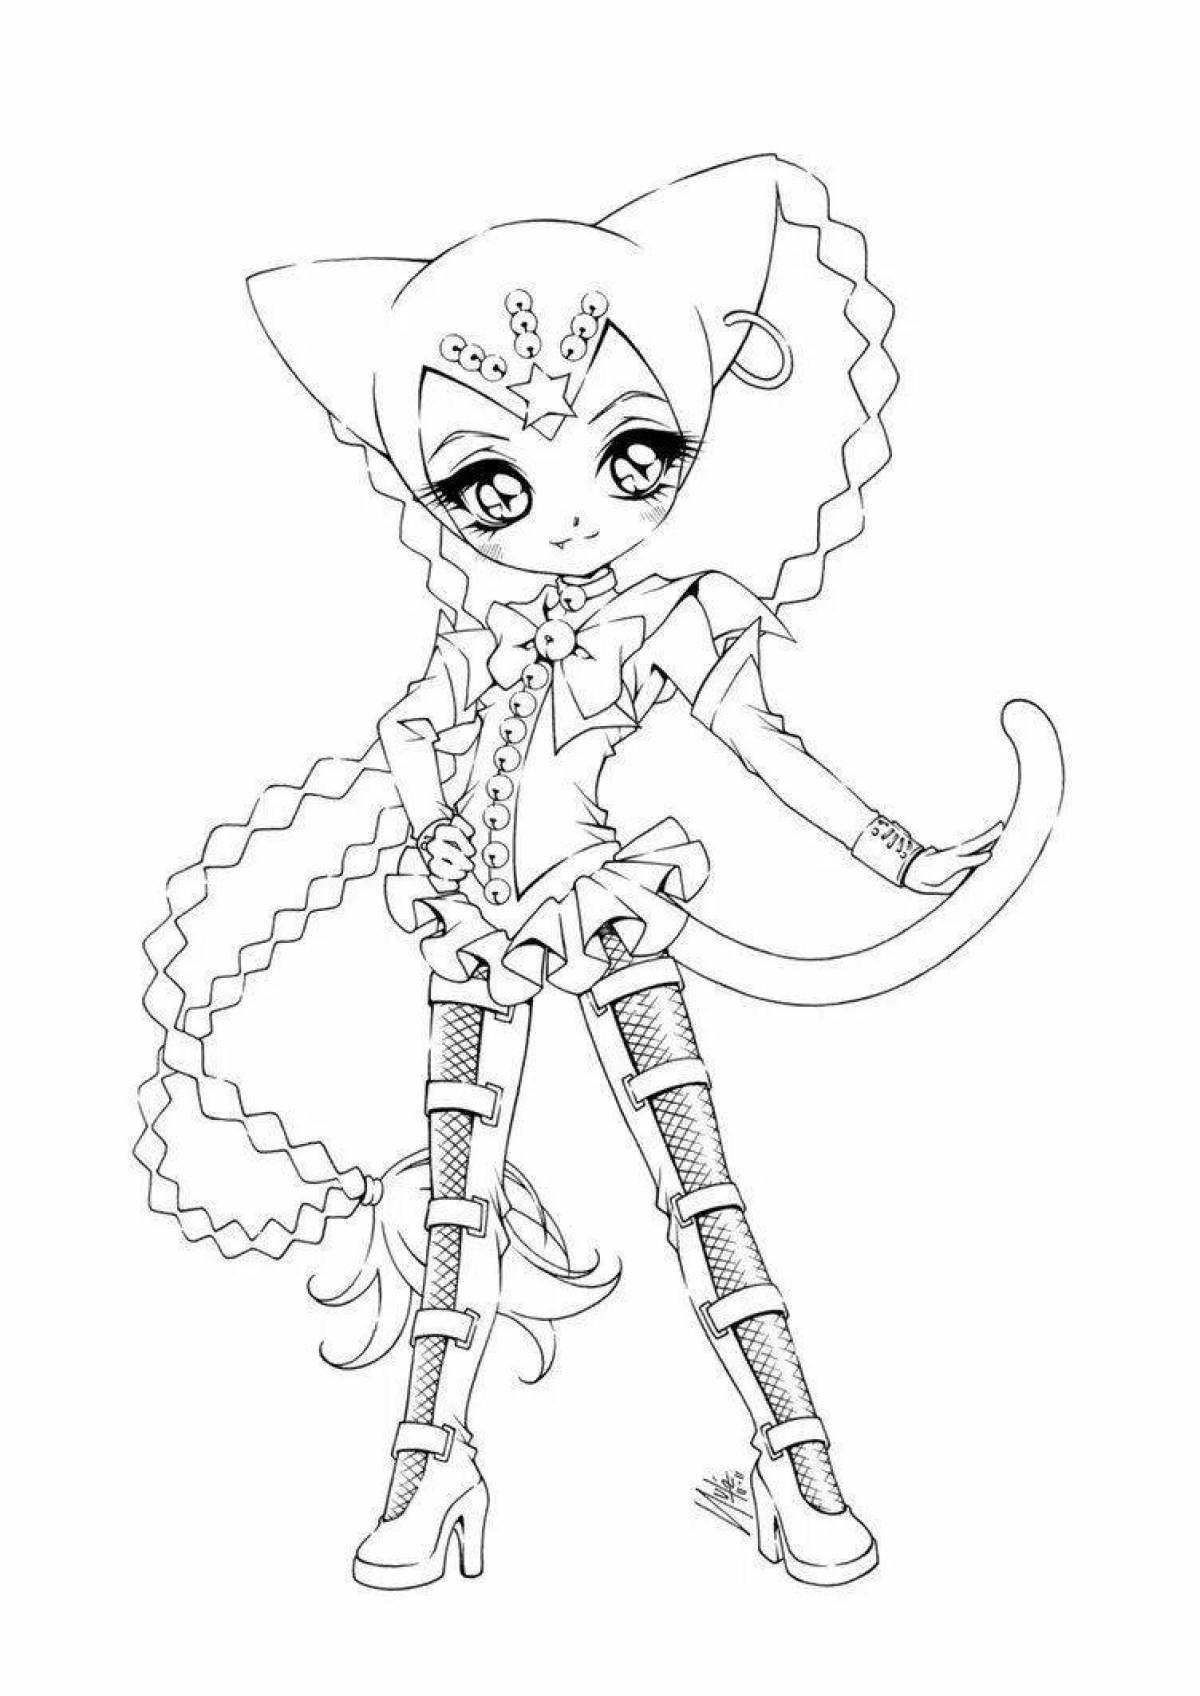 Animated catman coloring page